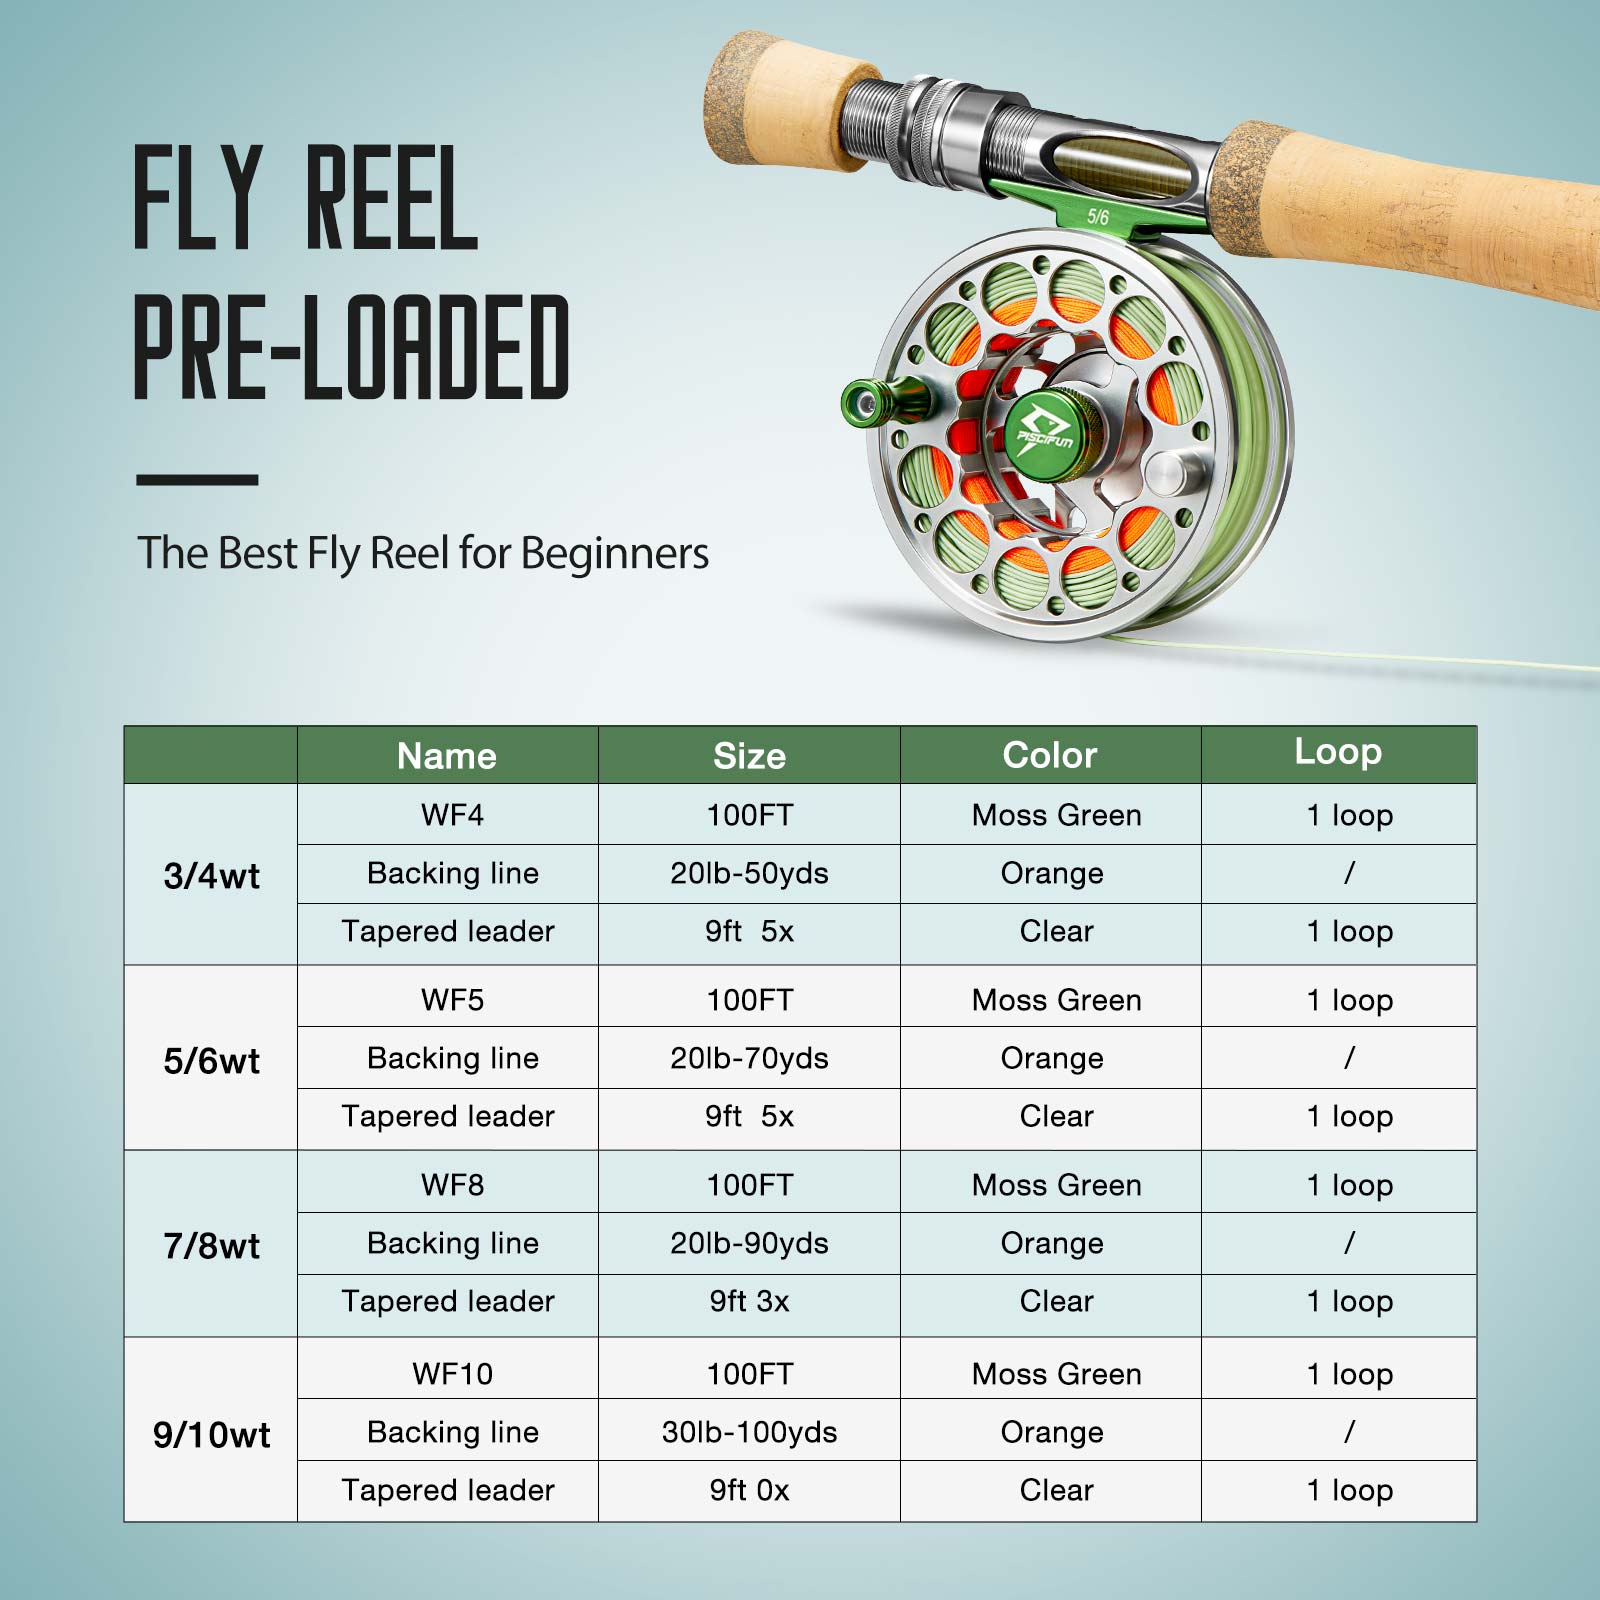 Premium Quality Stainless Steel Fly Fishing